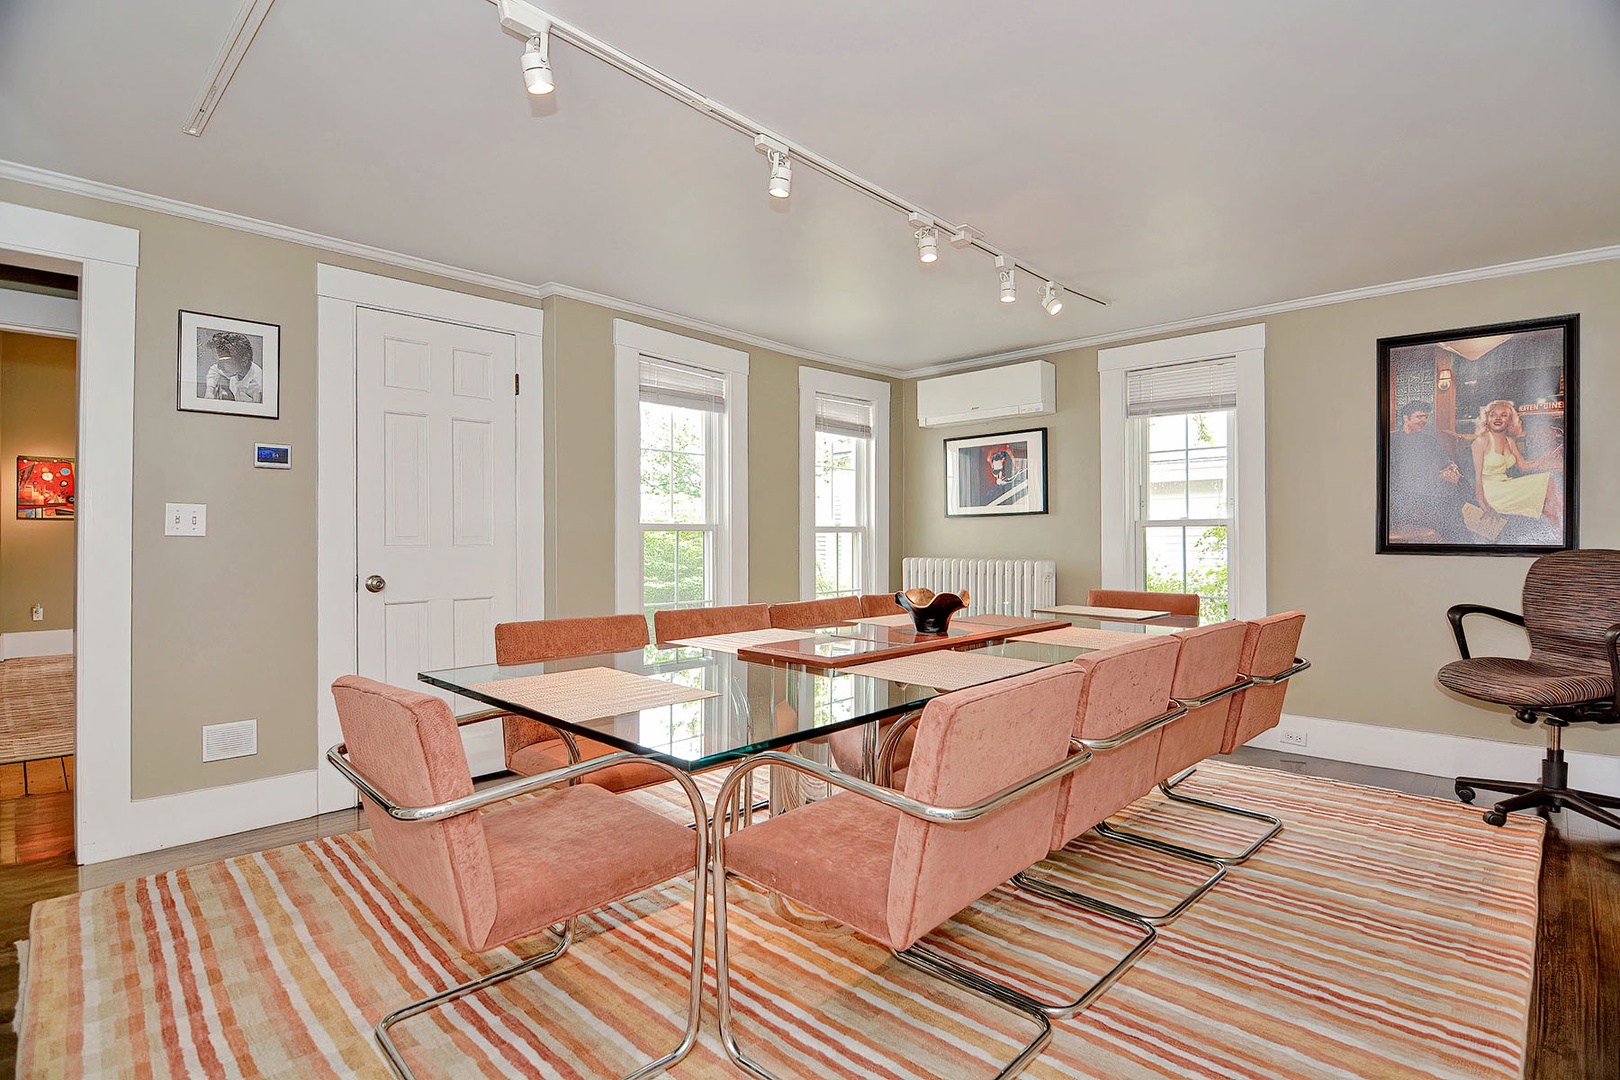 Dining room with seating for 10.